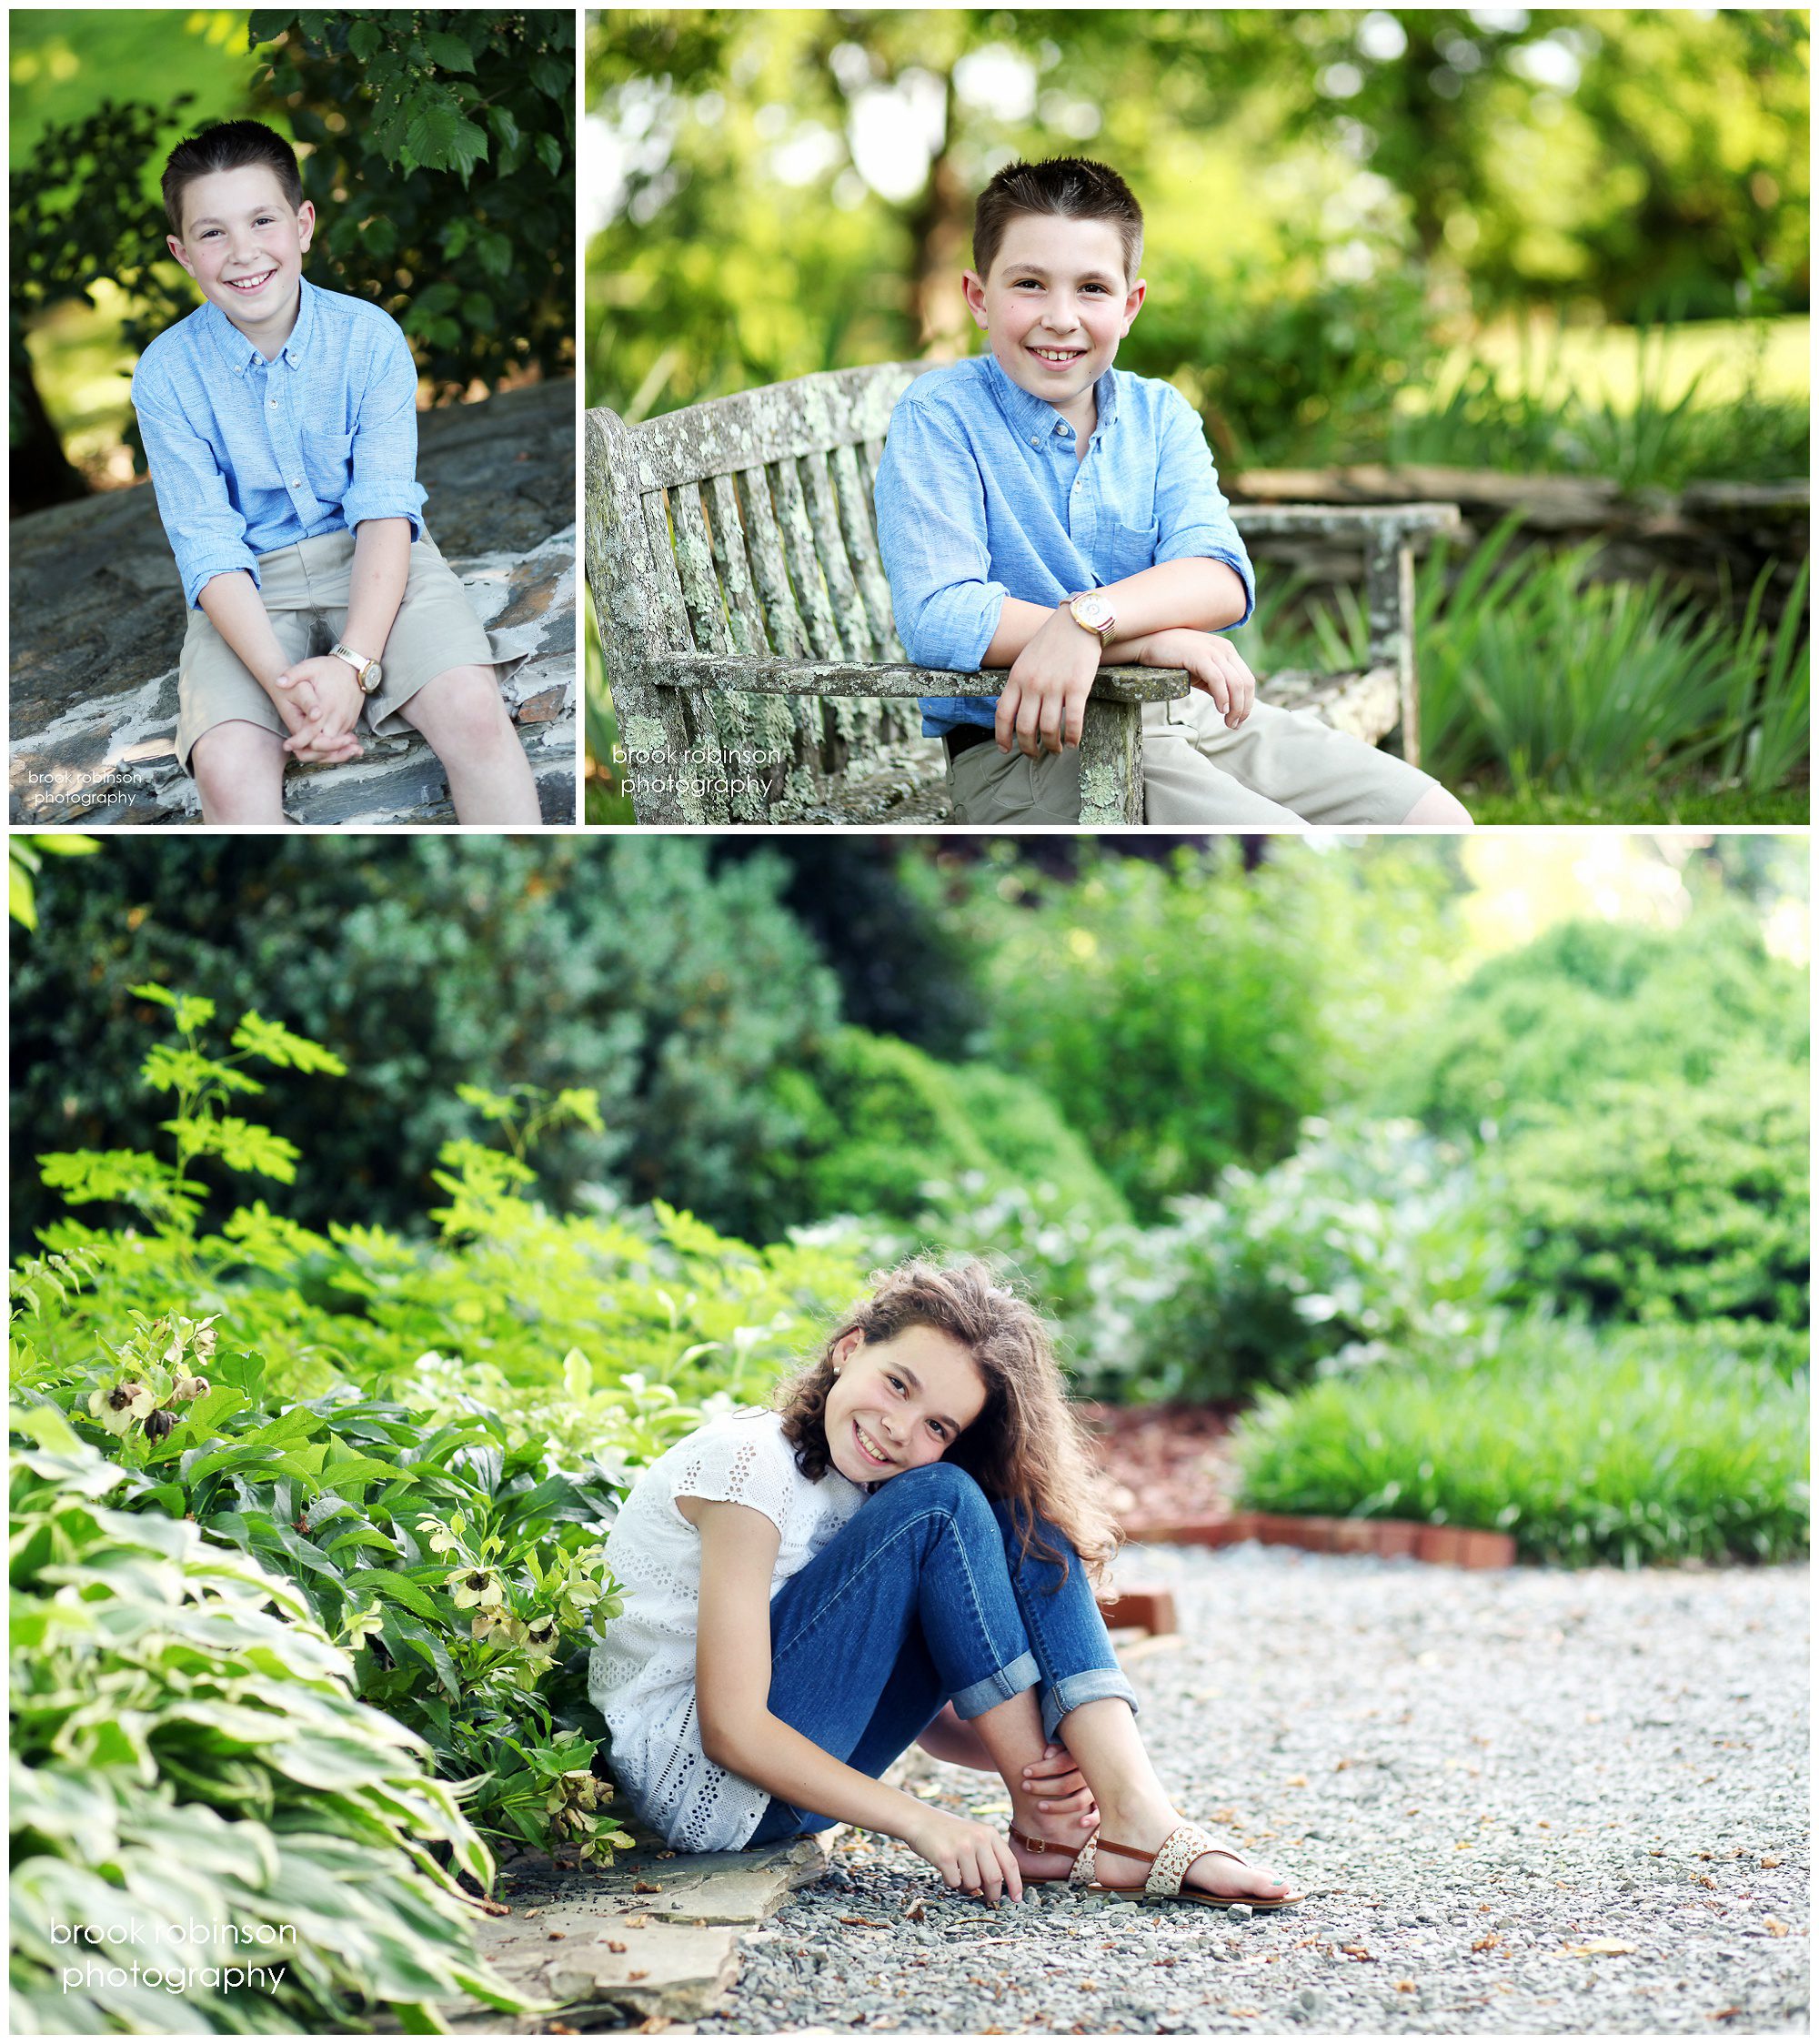 charlottesville family portraits clifton inn albemarle county central virginia summer spring siblings parents pictures photographer cookies chocolate chip 